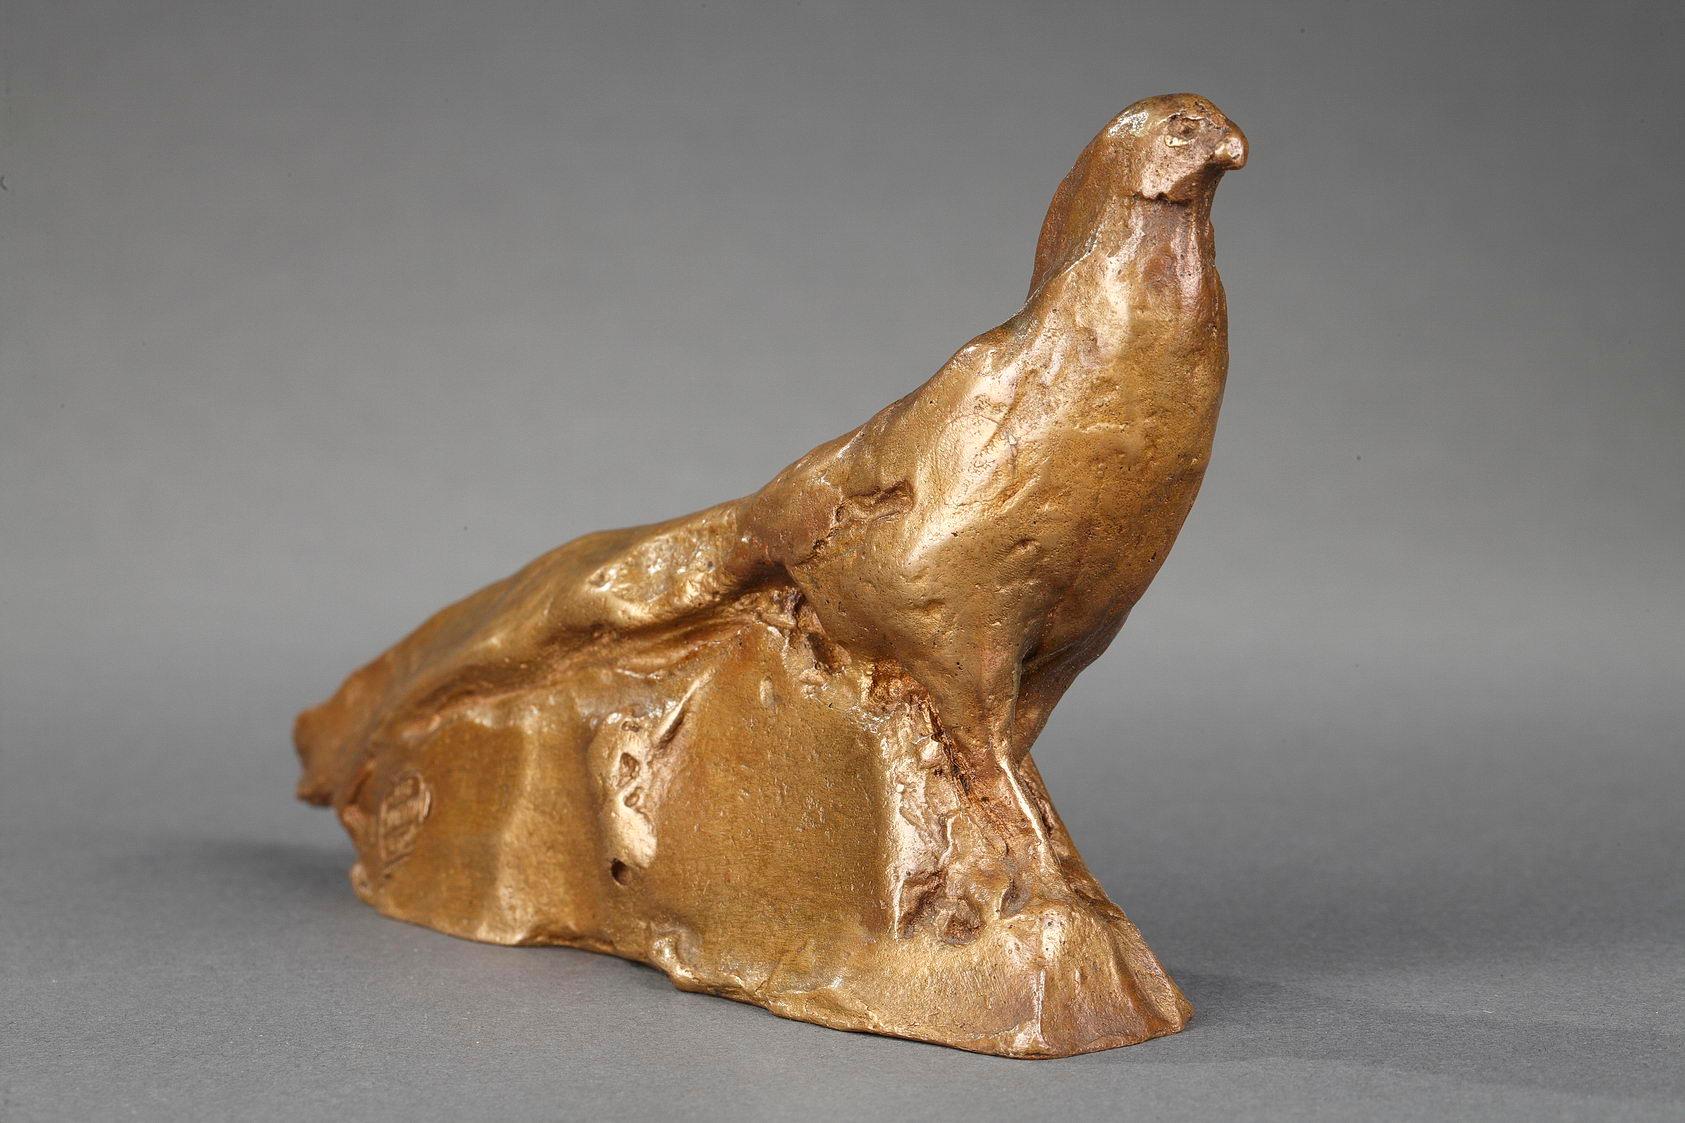 Pheasant
by François Pompon (1855-1933)

Exceptional bronze with old gilded patina
Cast by Valsuani
Period cast

France
circa 1930
height 8,2 cm
length 14,2 cm
width 3,6 cm

A similar model is represented in 